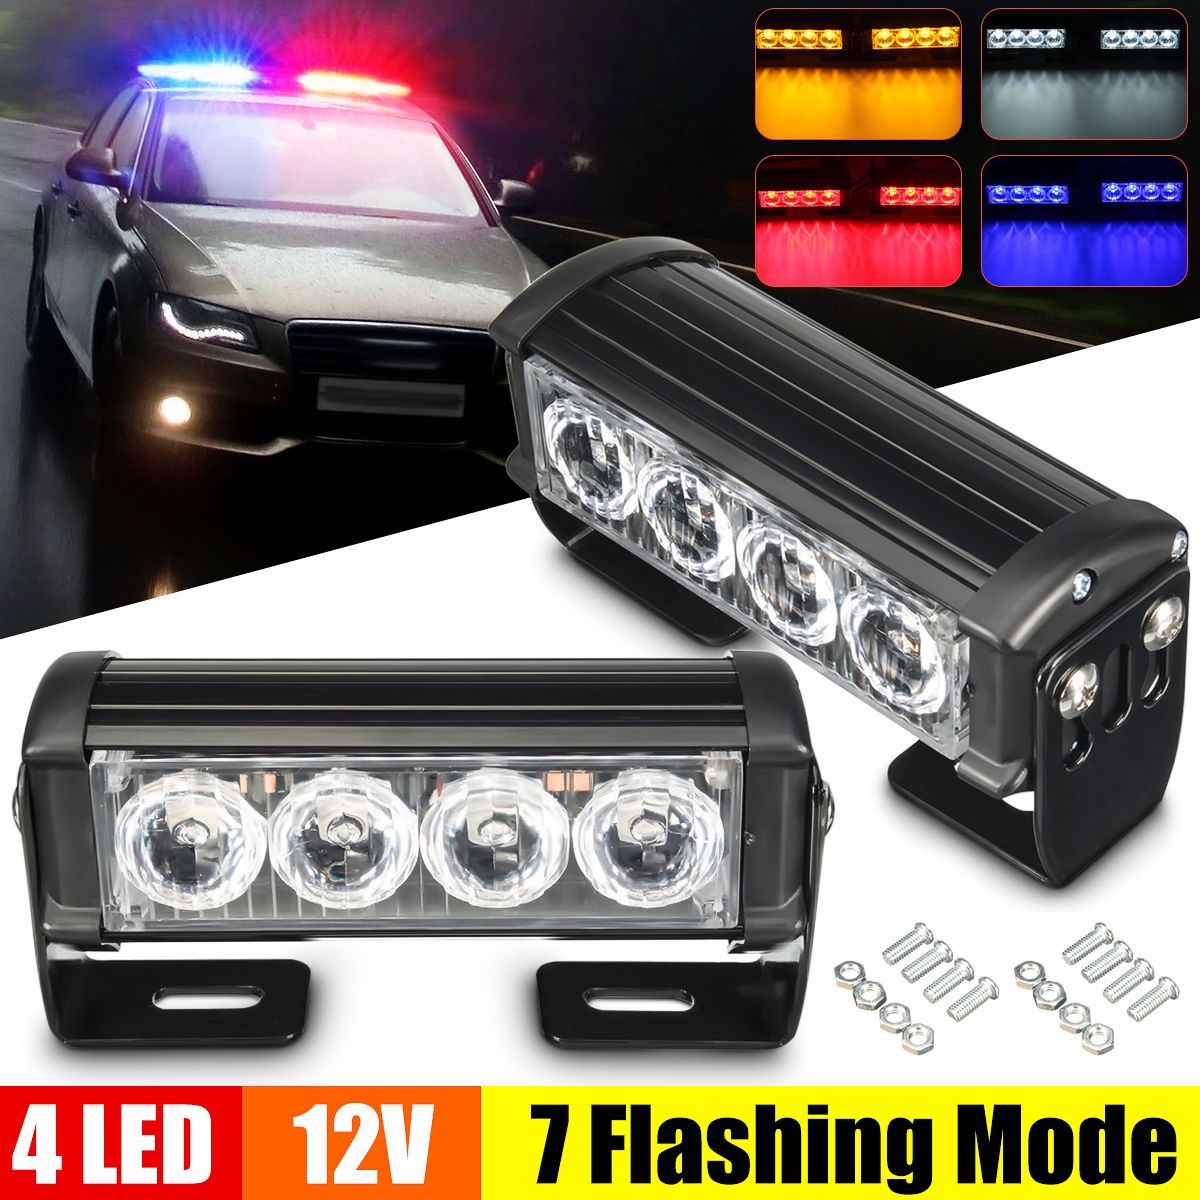 2PCS-12V-LED-Strobe-Flash-Lights-Front-Grille-Warning-Lamp-Waterproof-with-7-Flashing-Modes-Switch-f-1059762